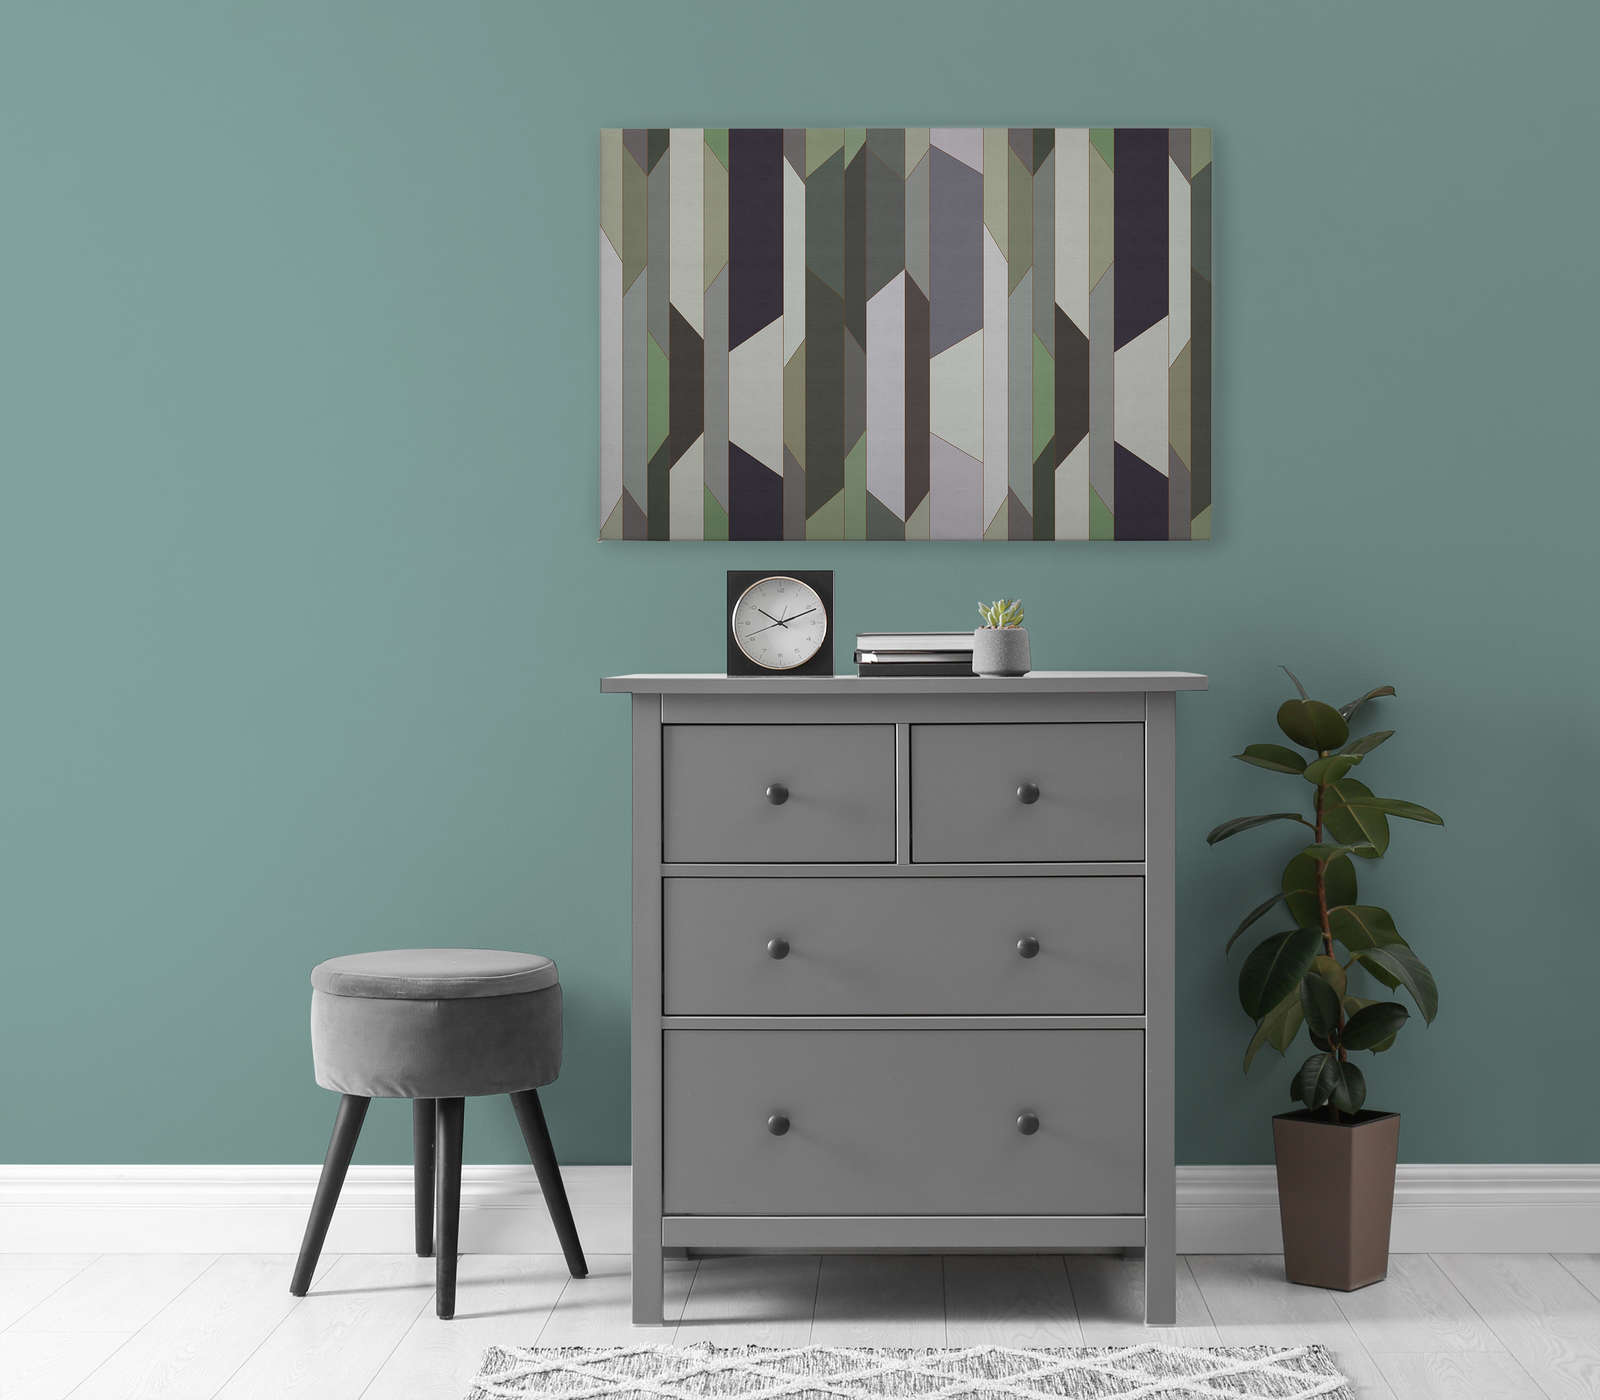             Fold 1 - Canvas painting with retro style stripe design - 1.20 m x 0.80 m
        